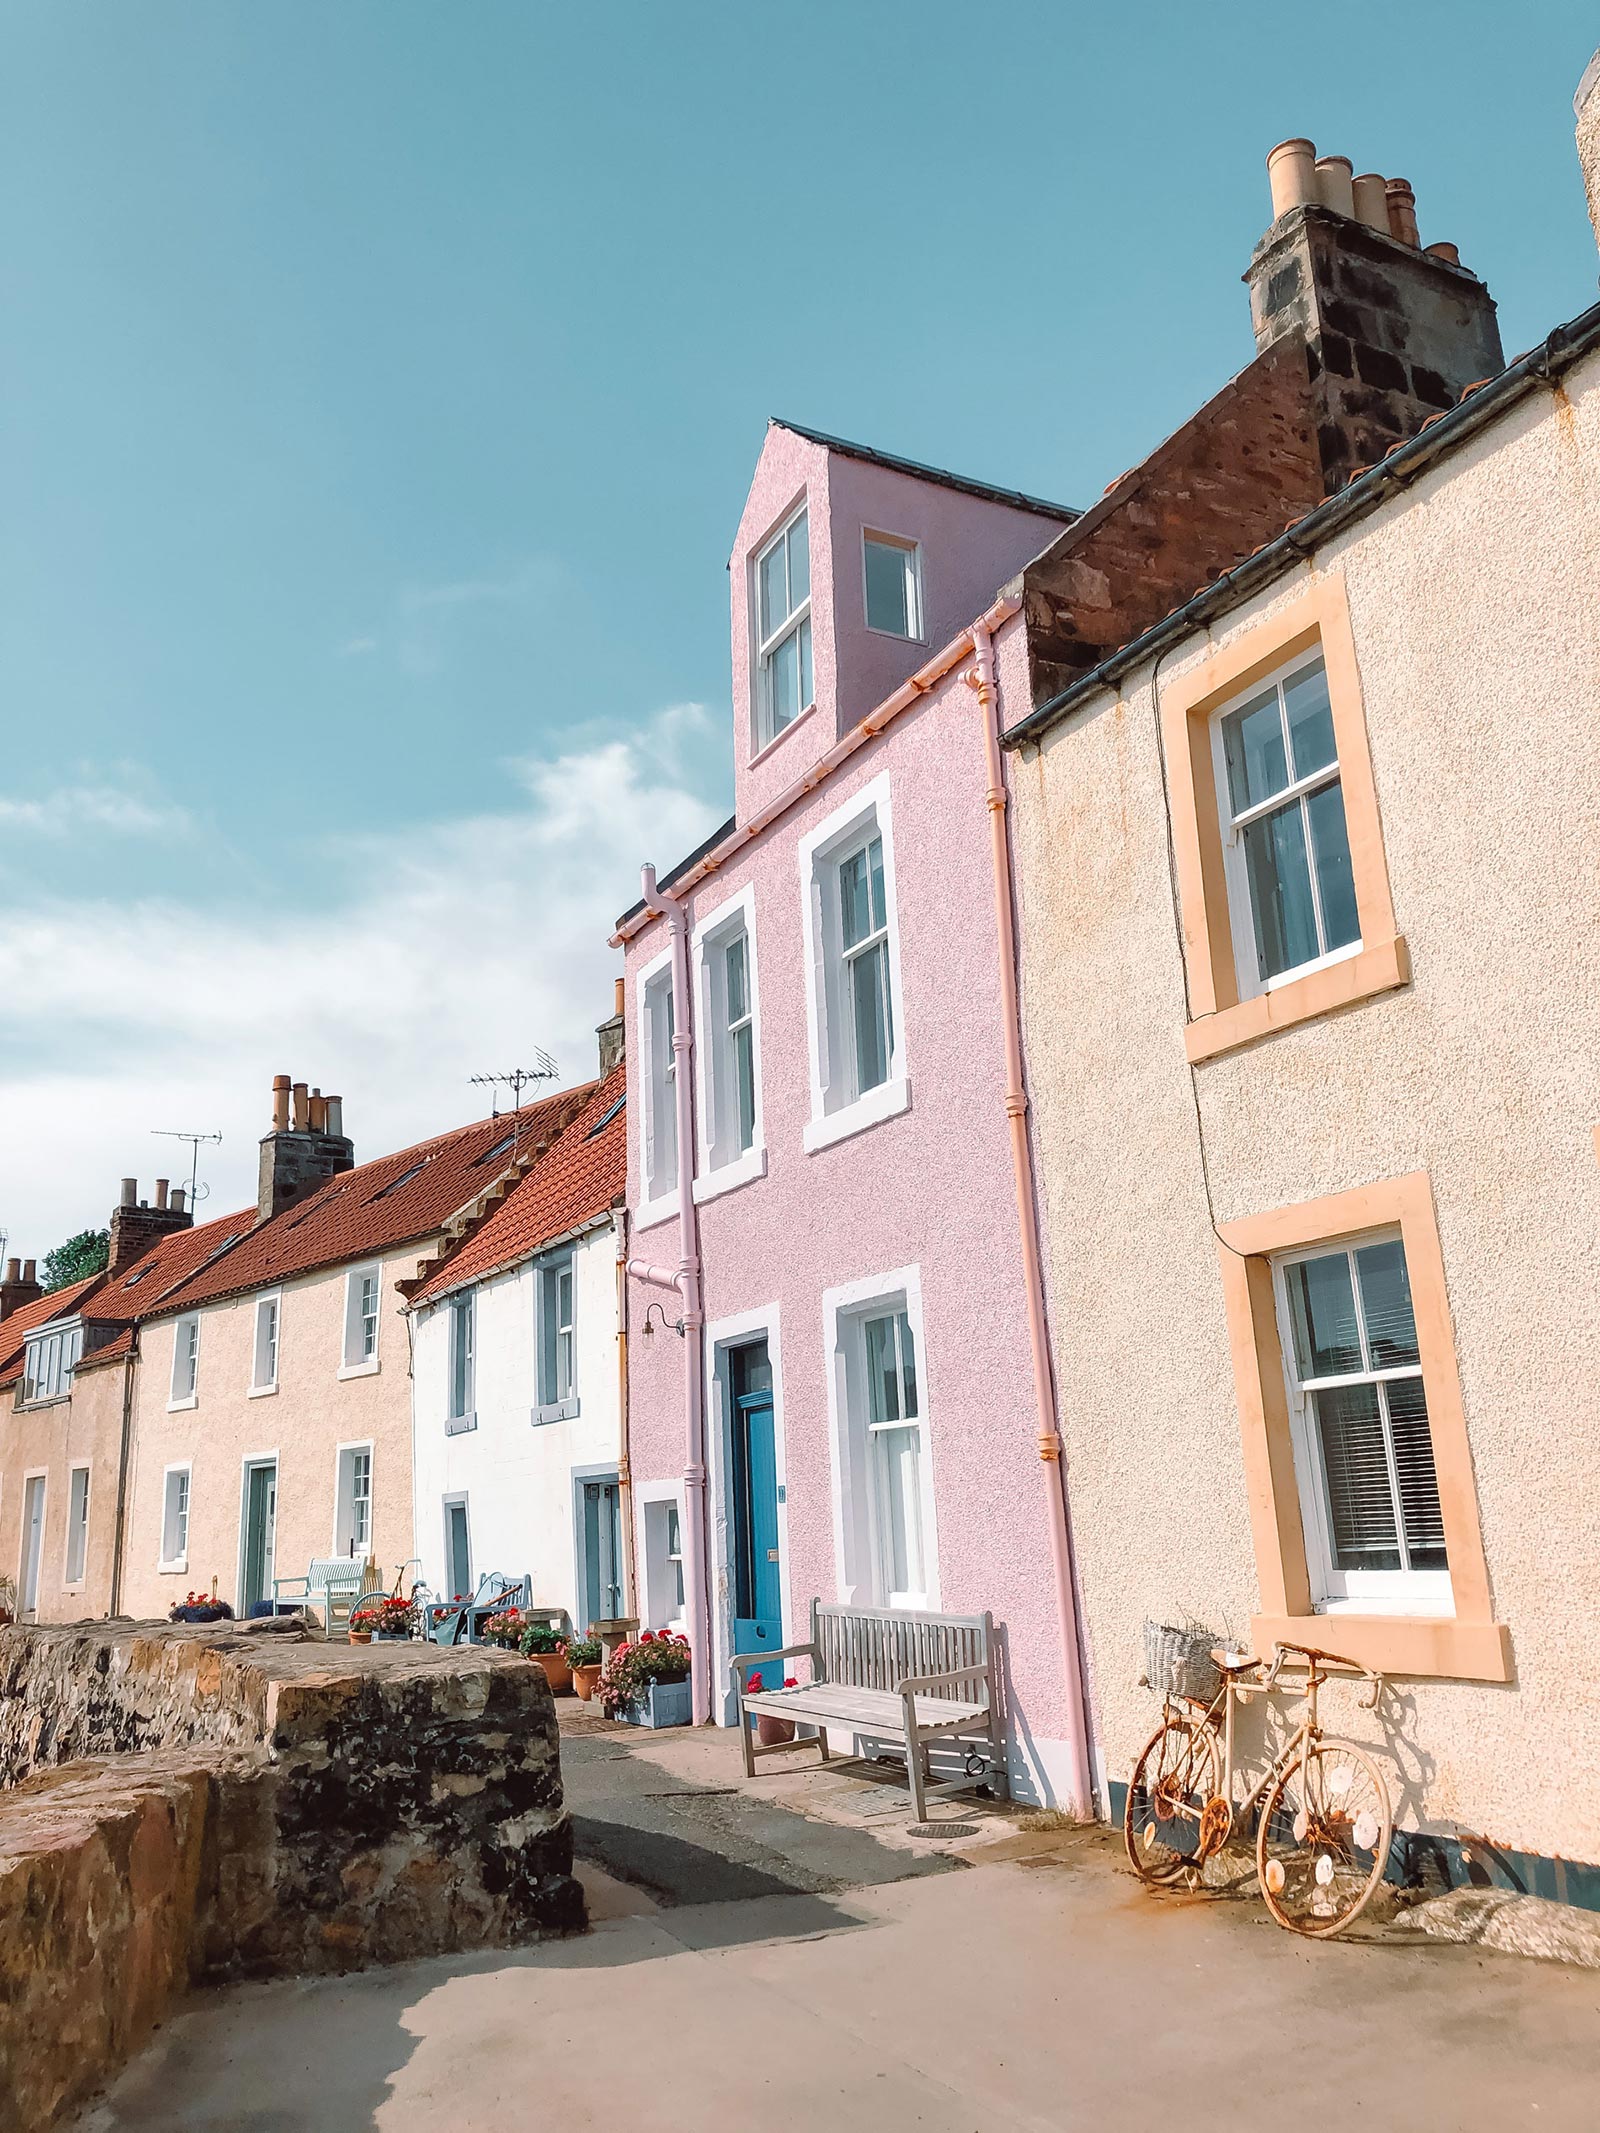 pastel houses in Pittenweem, Fife